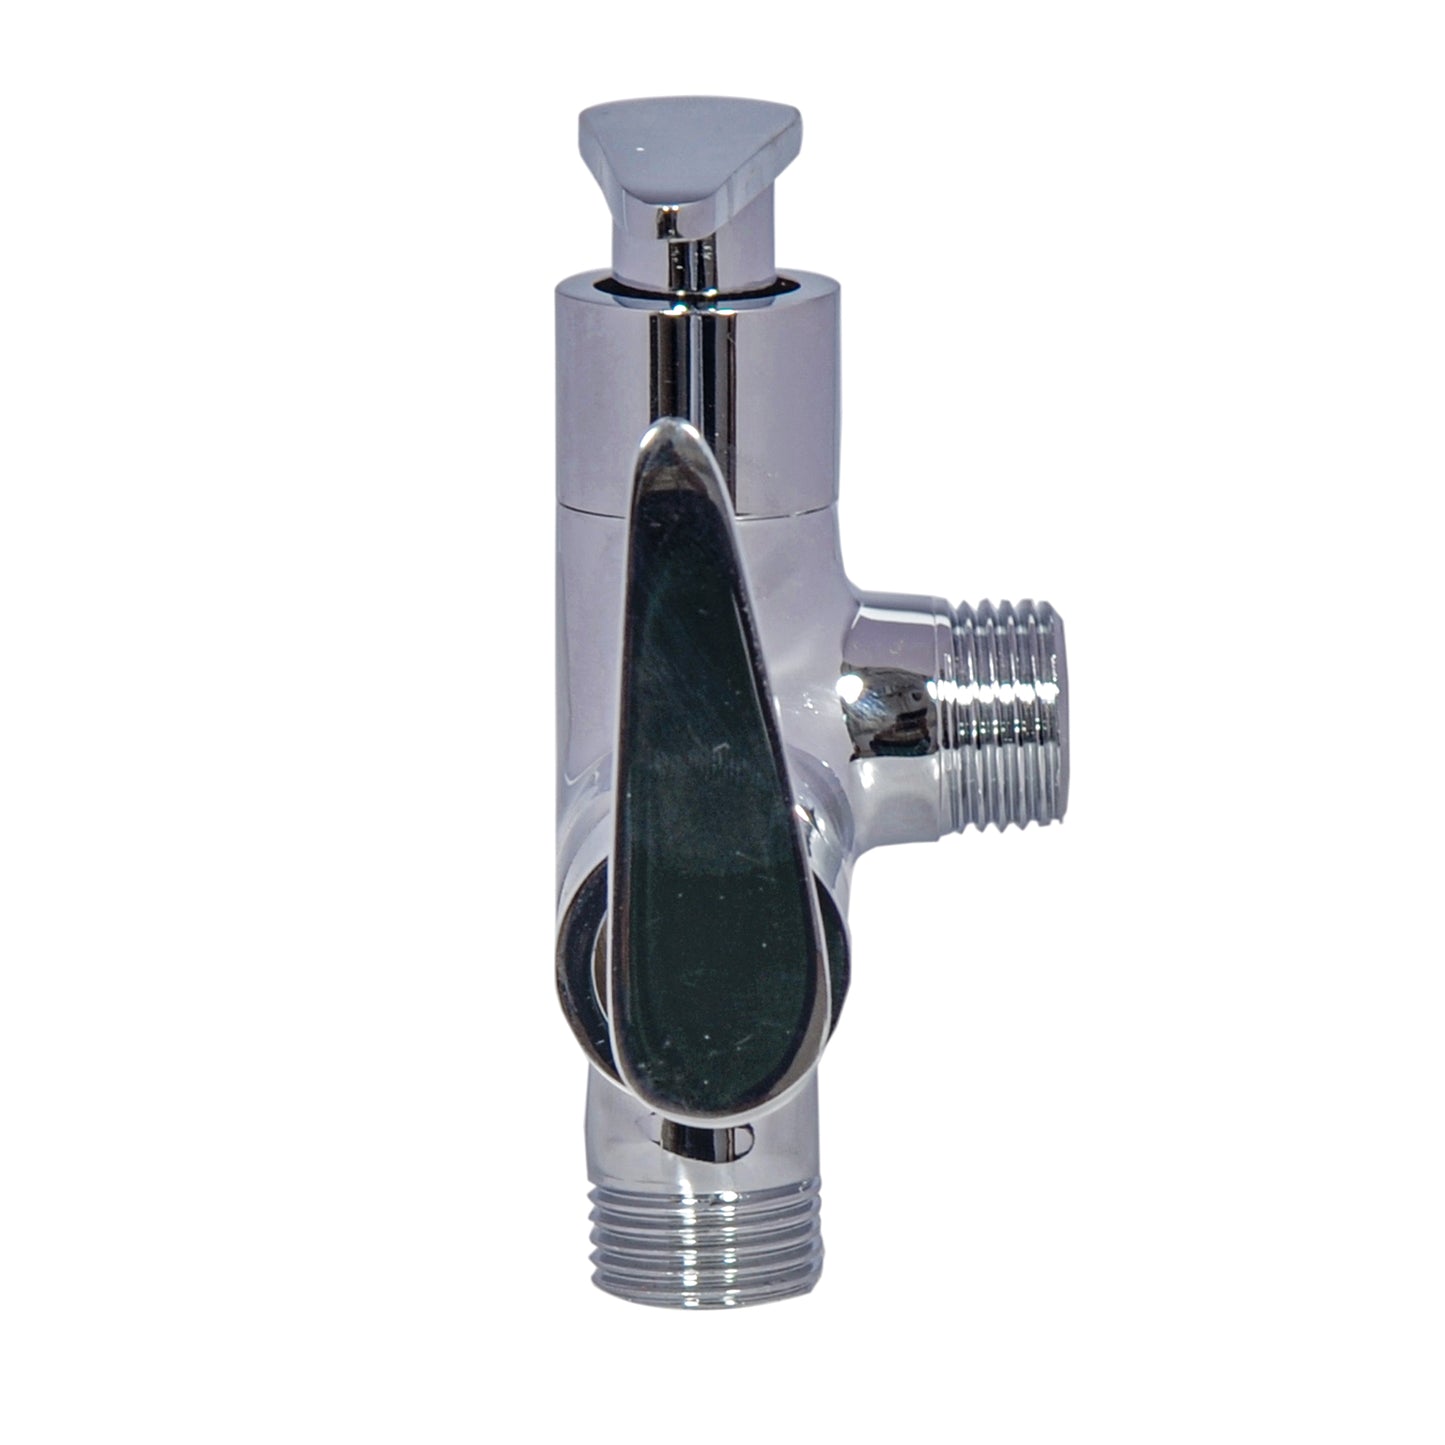 AC2-01 2 in 1 Angle Cock tap Valve for Bathroom Kitchen washbasin tap faucets with Wall Flange